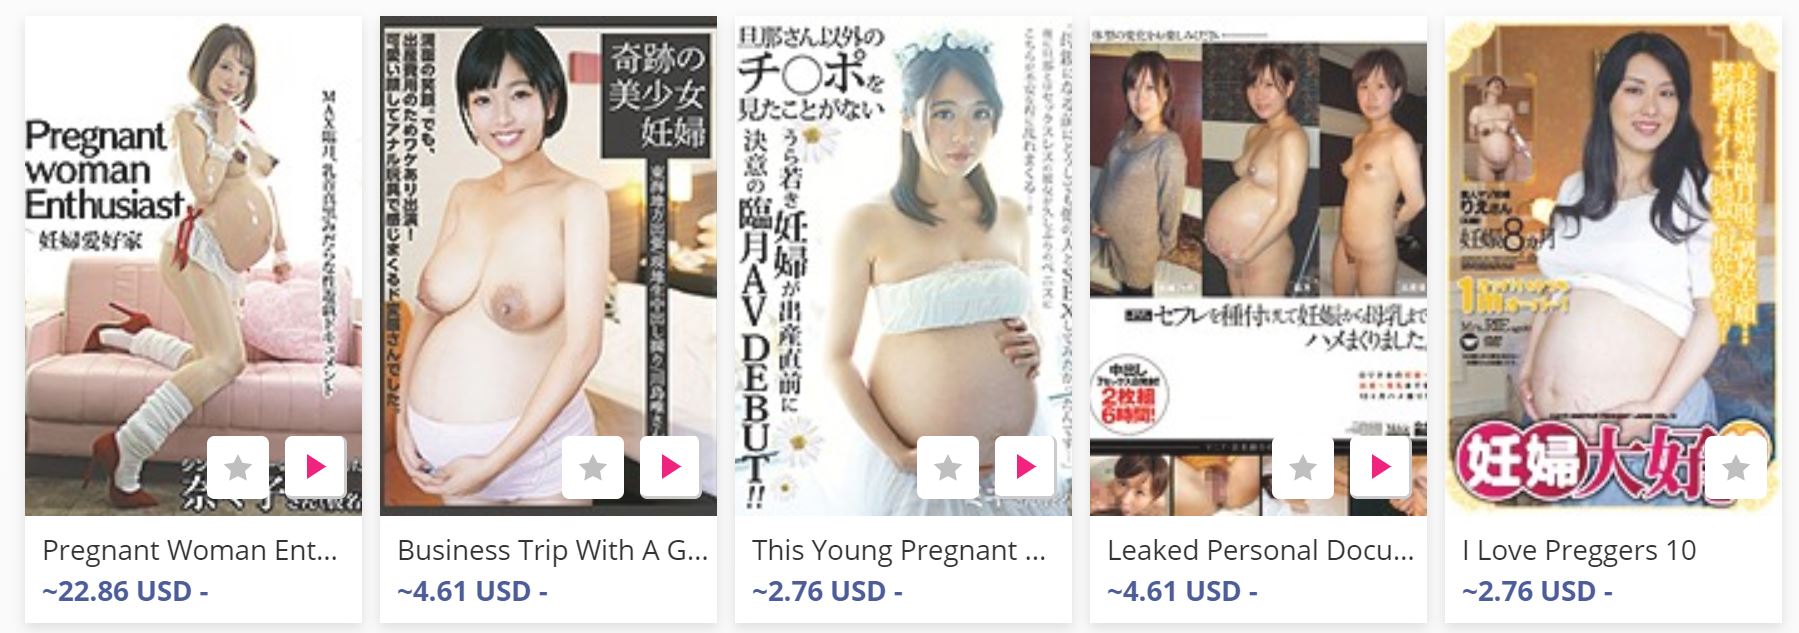 R18 Pregnant Girls Movies Banner